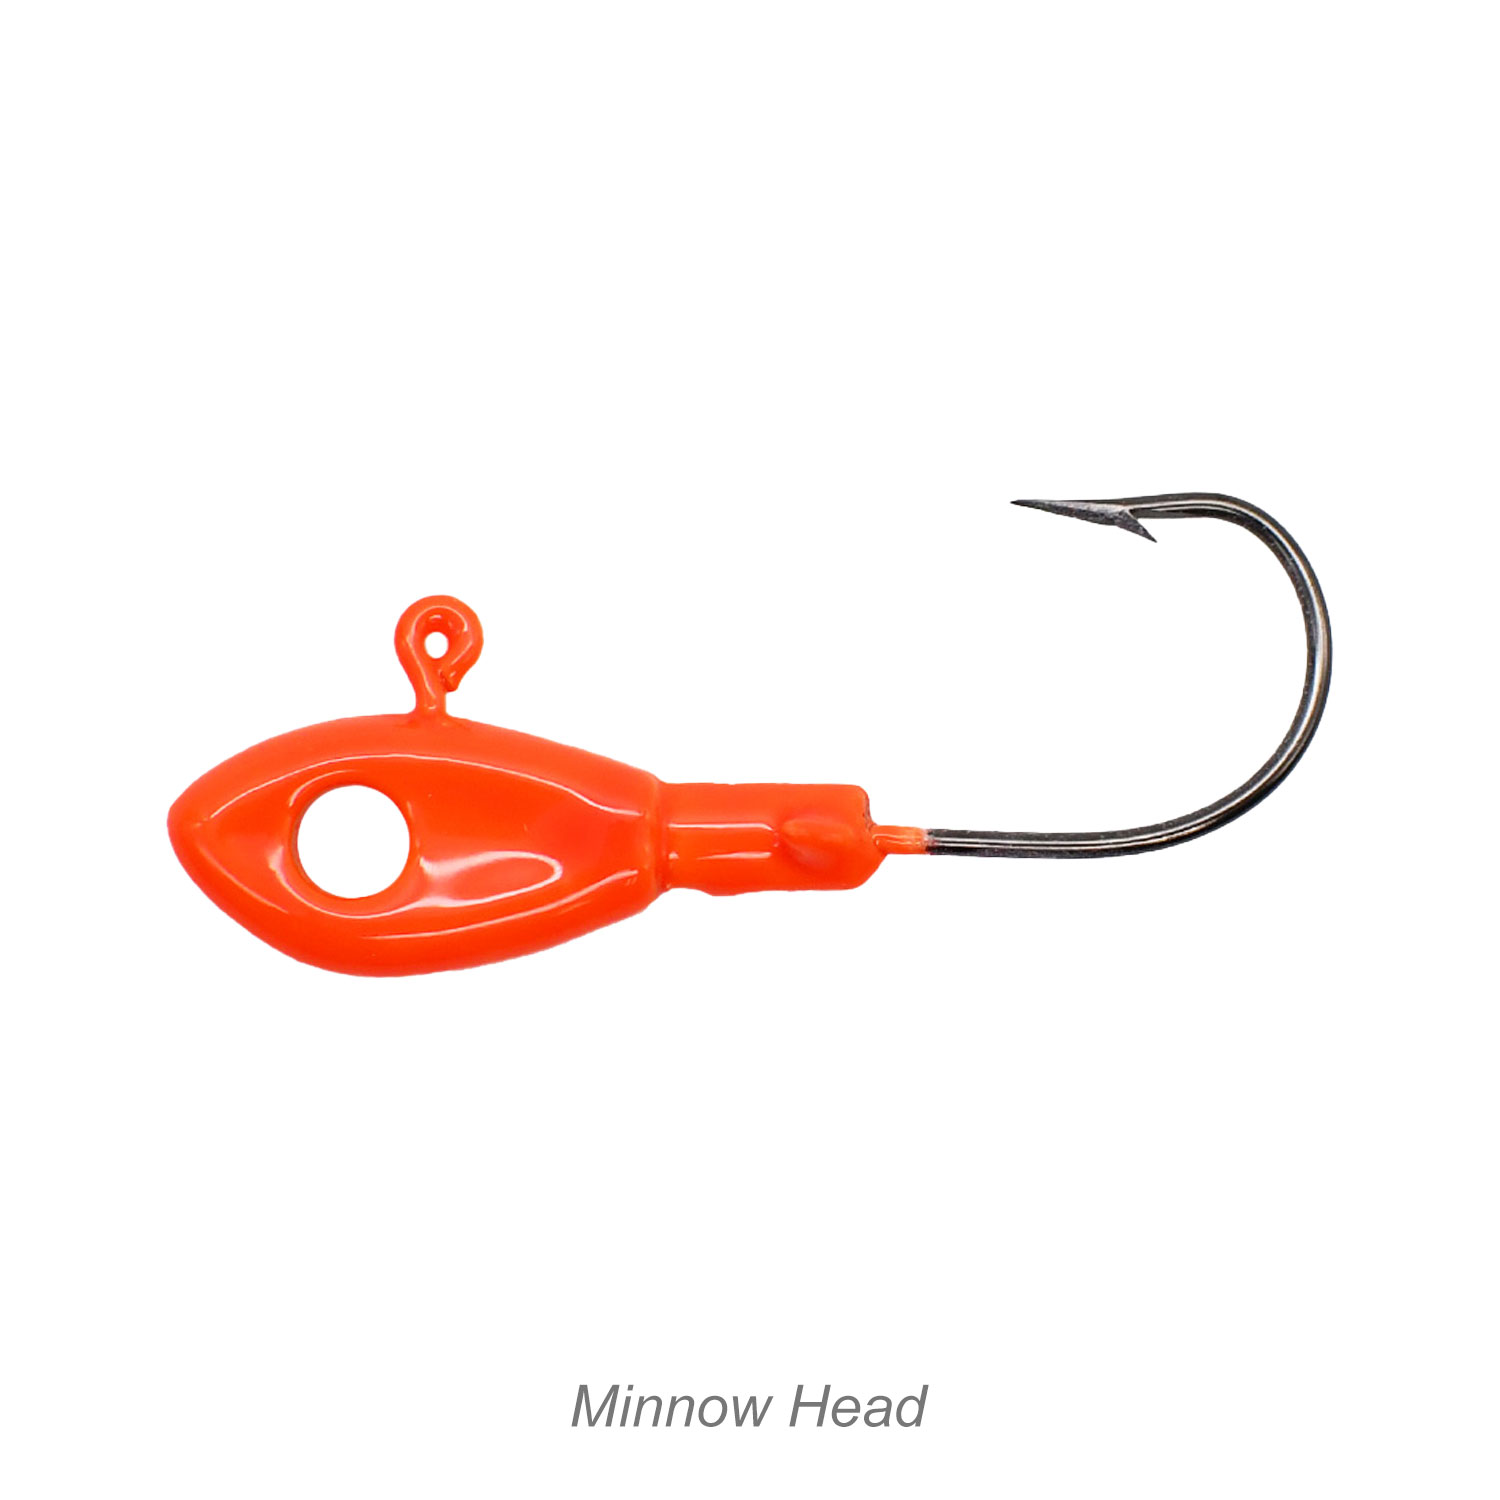 Do-It Minnow head mold - frustrated about actual weights